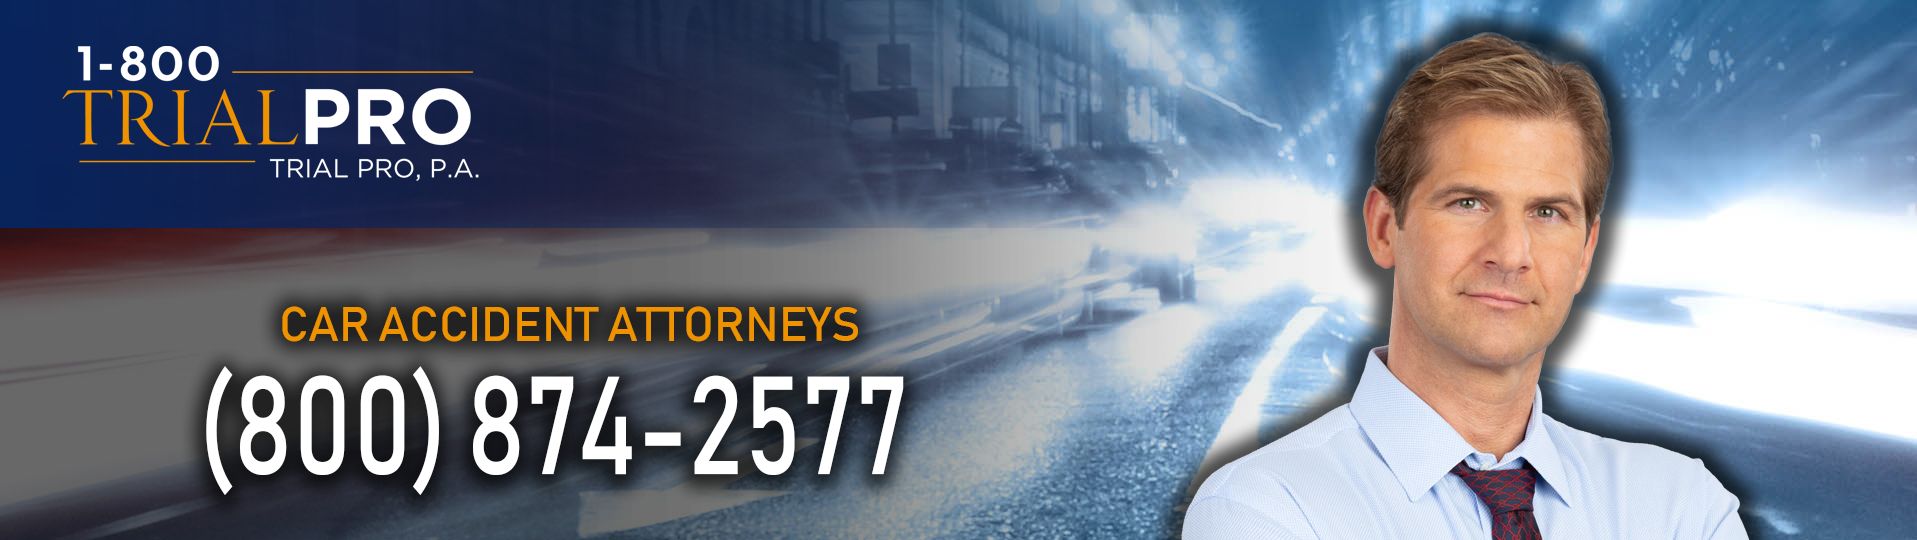 Melbourne Car Accident Lawyers